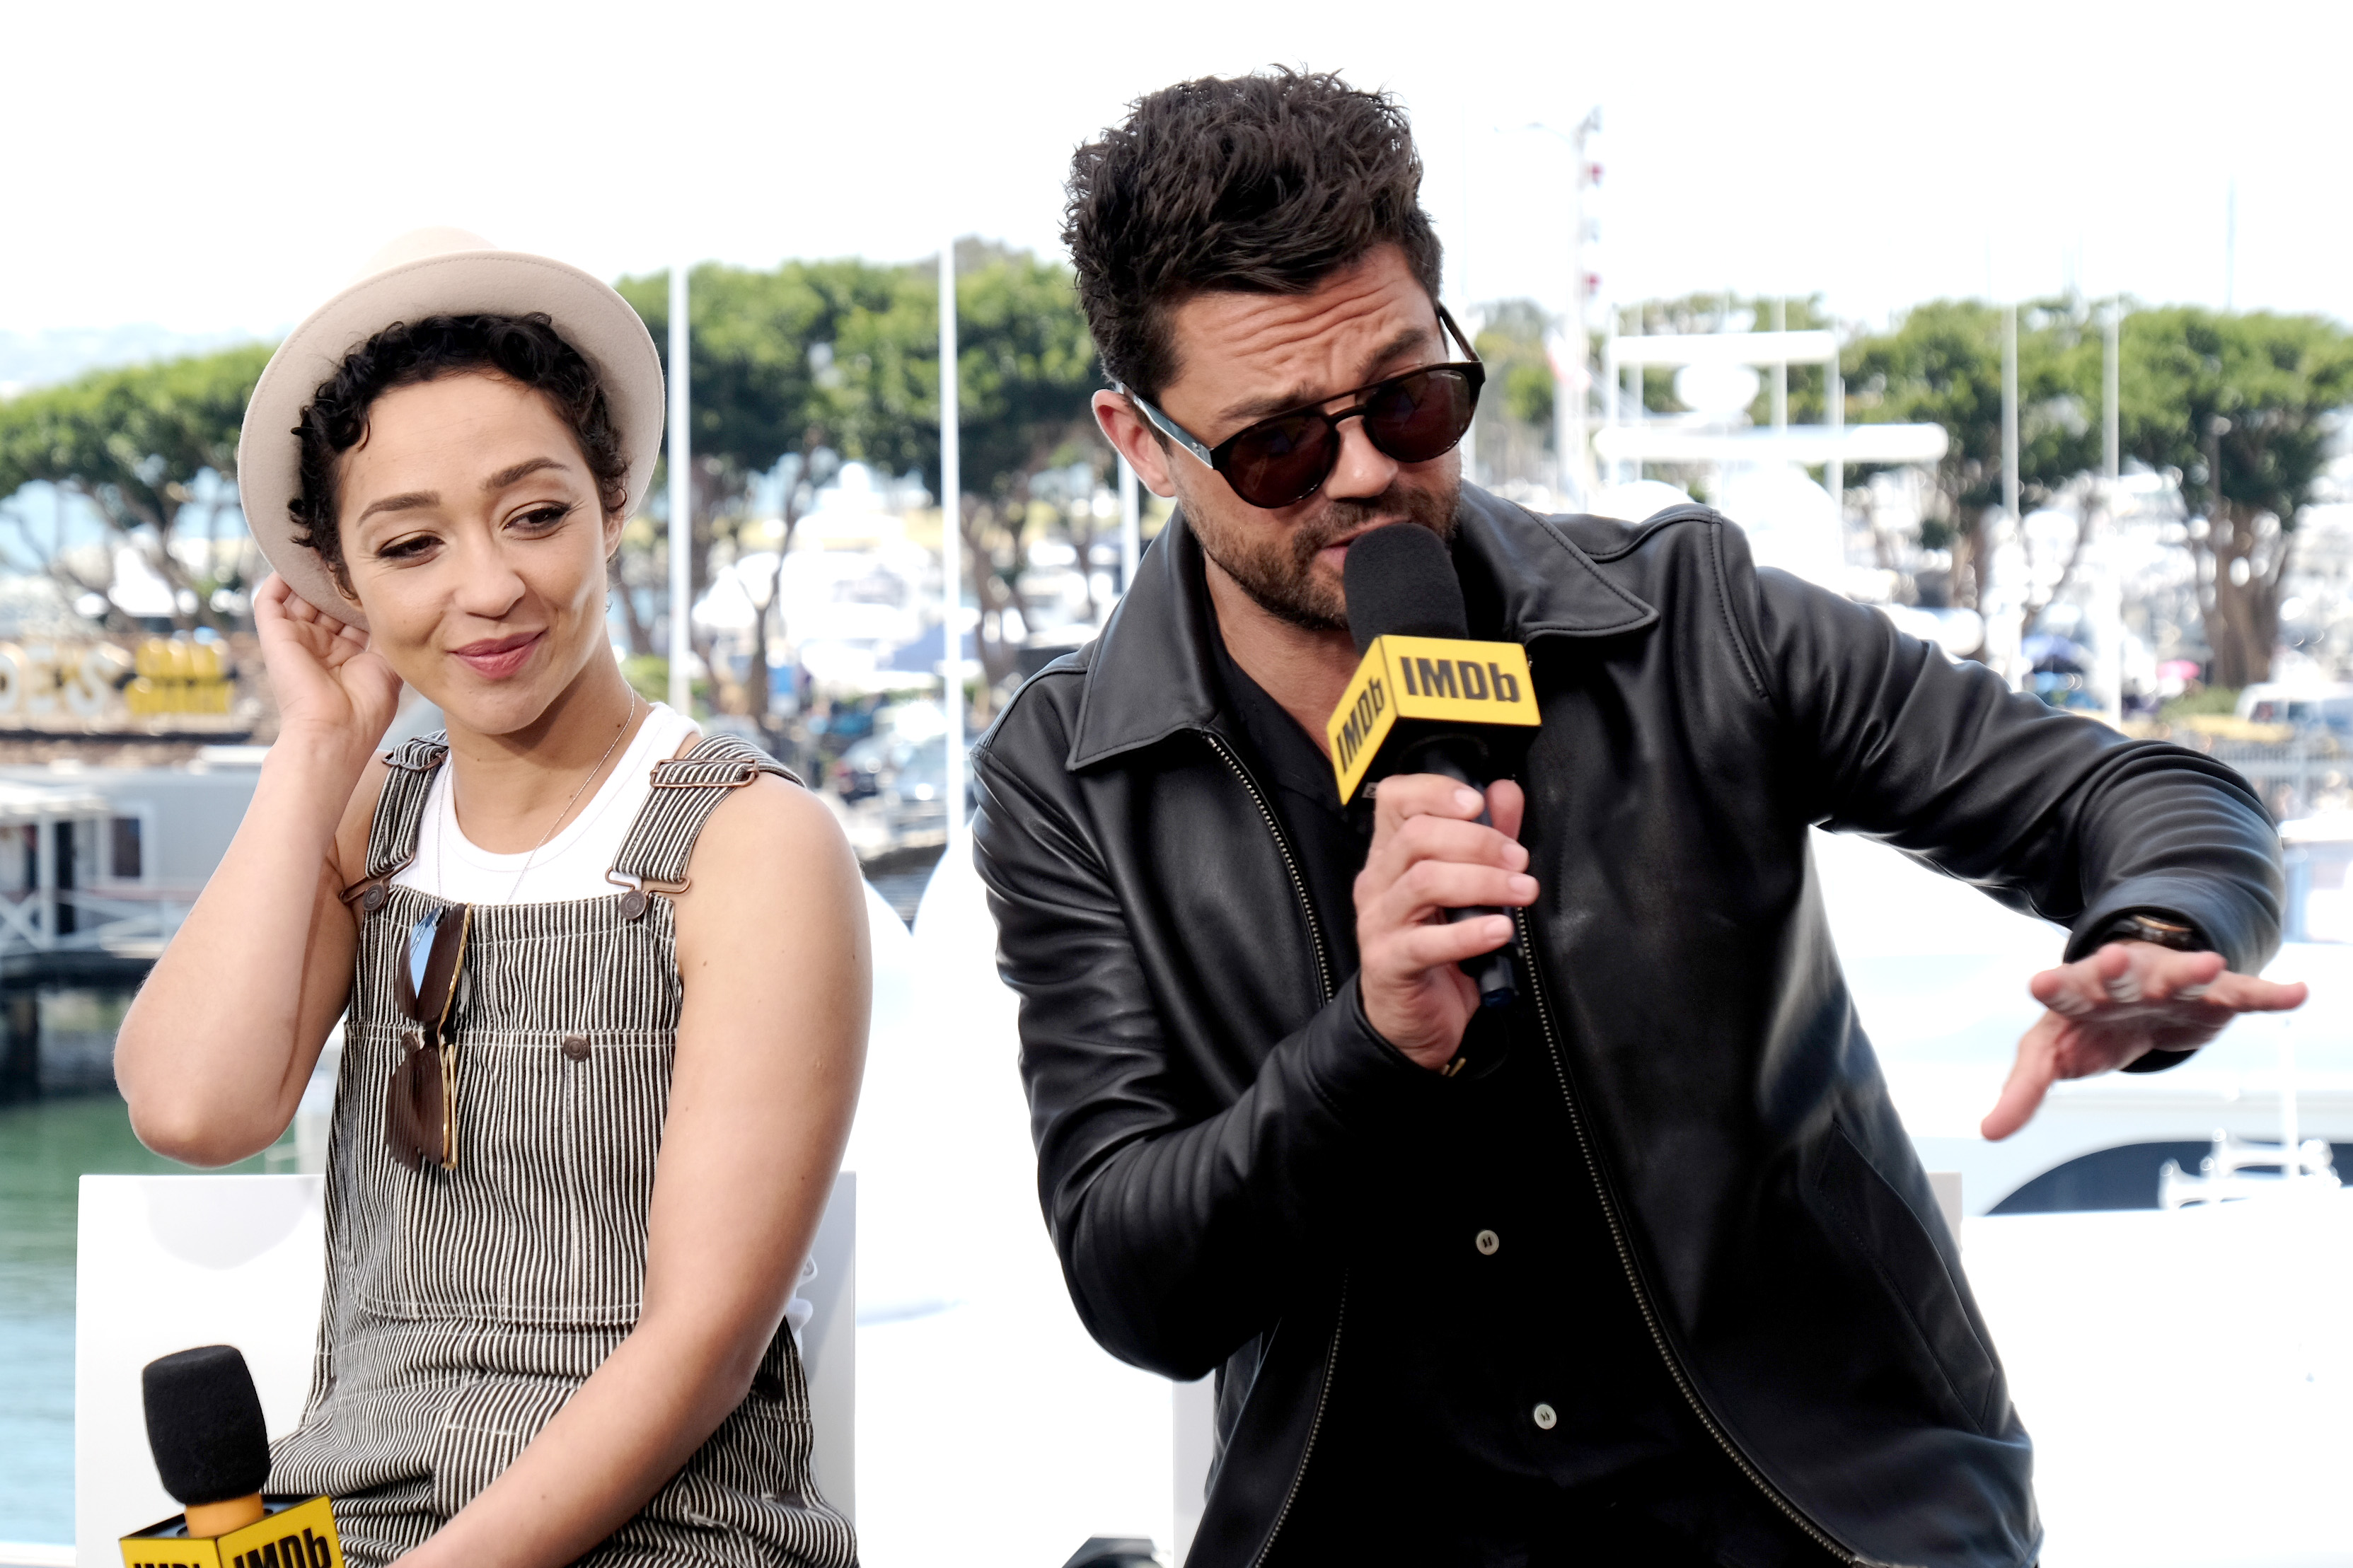 Ruth Negga and Dominic Cooper speak onstage at the #IMDboat at San Diego Comic-Con 2019 on July 19, 2019, in San Diego, California | Source: Getty Images